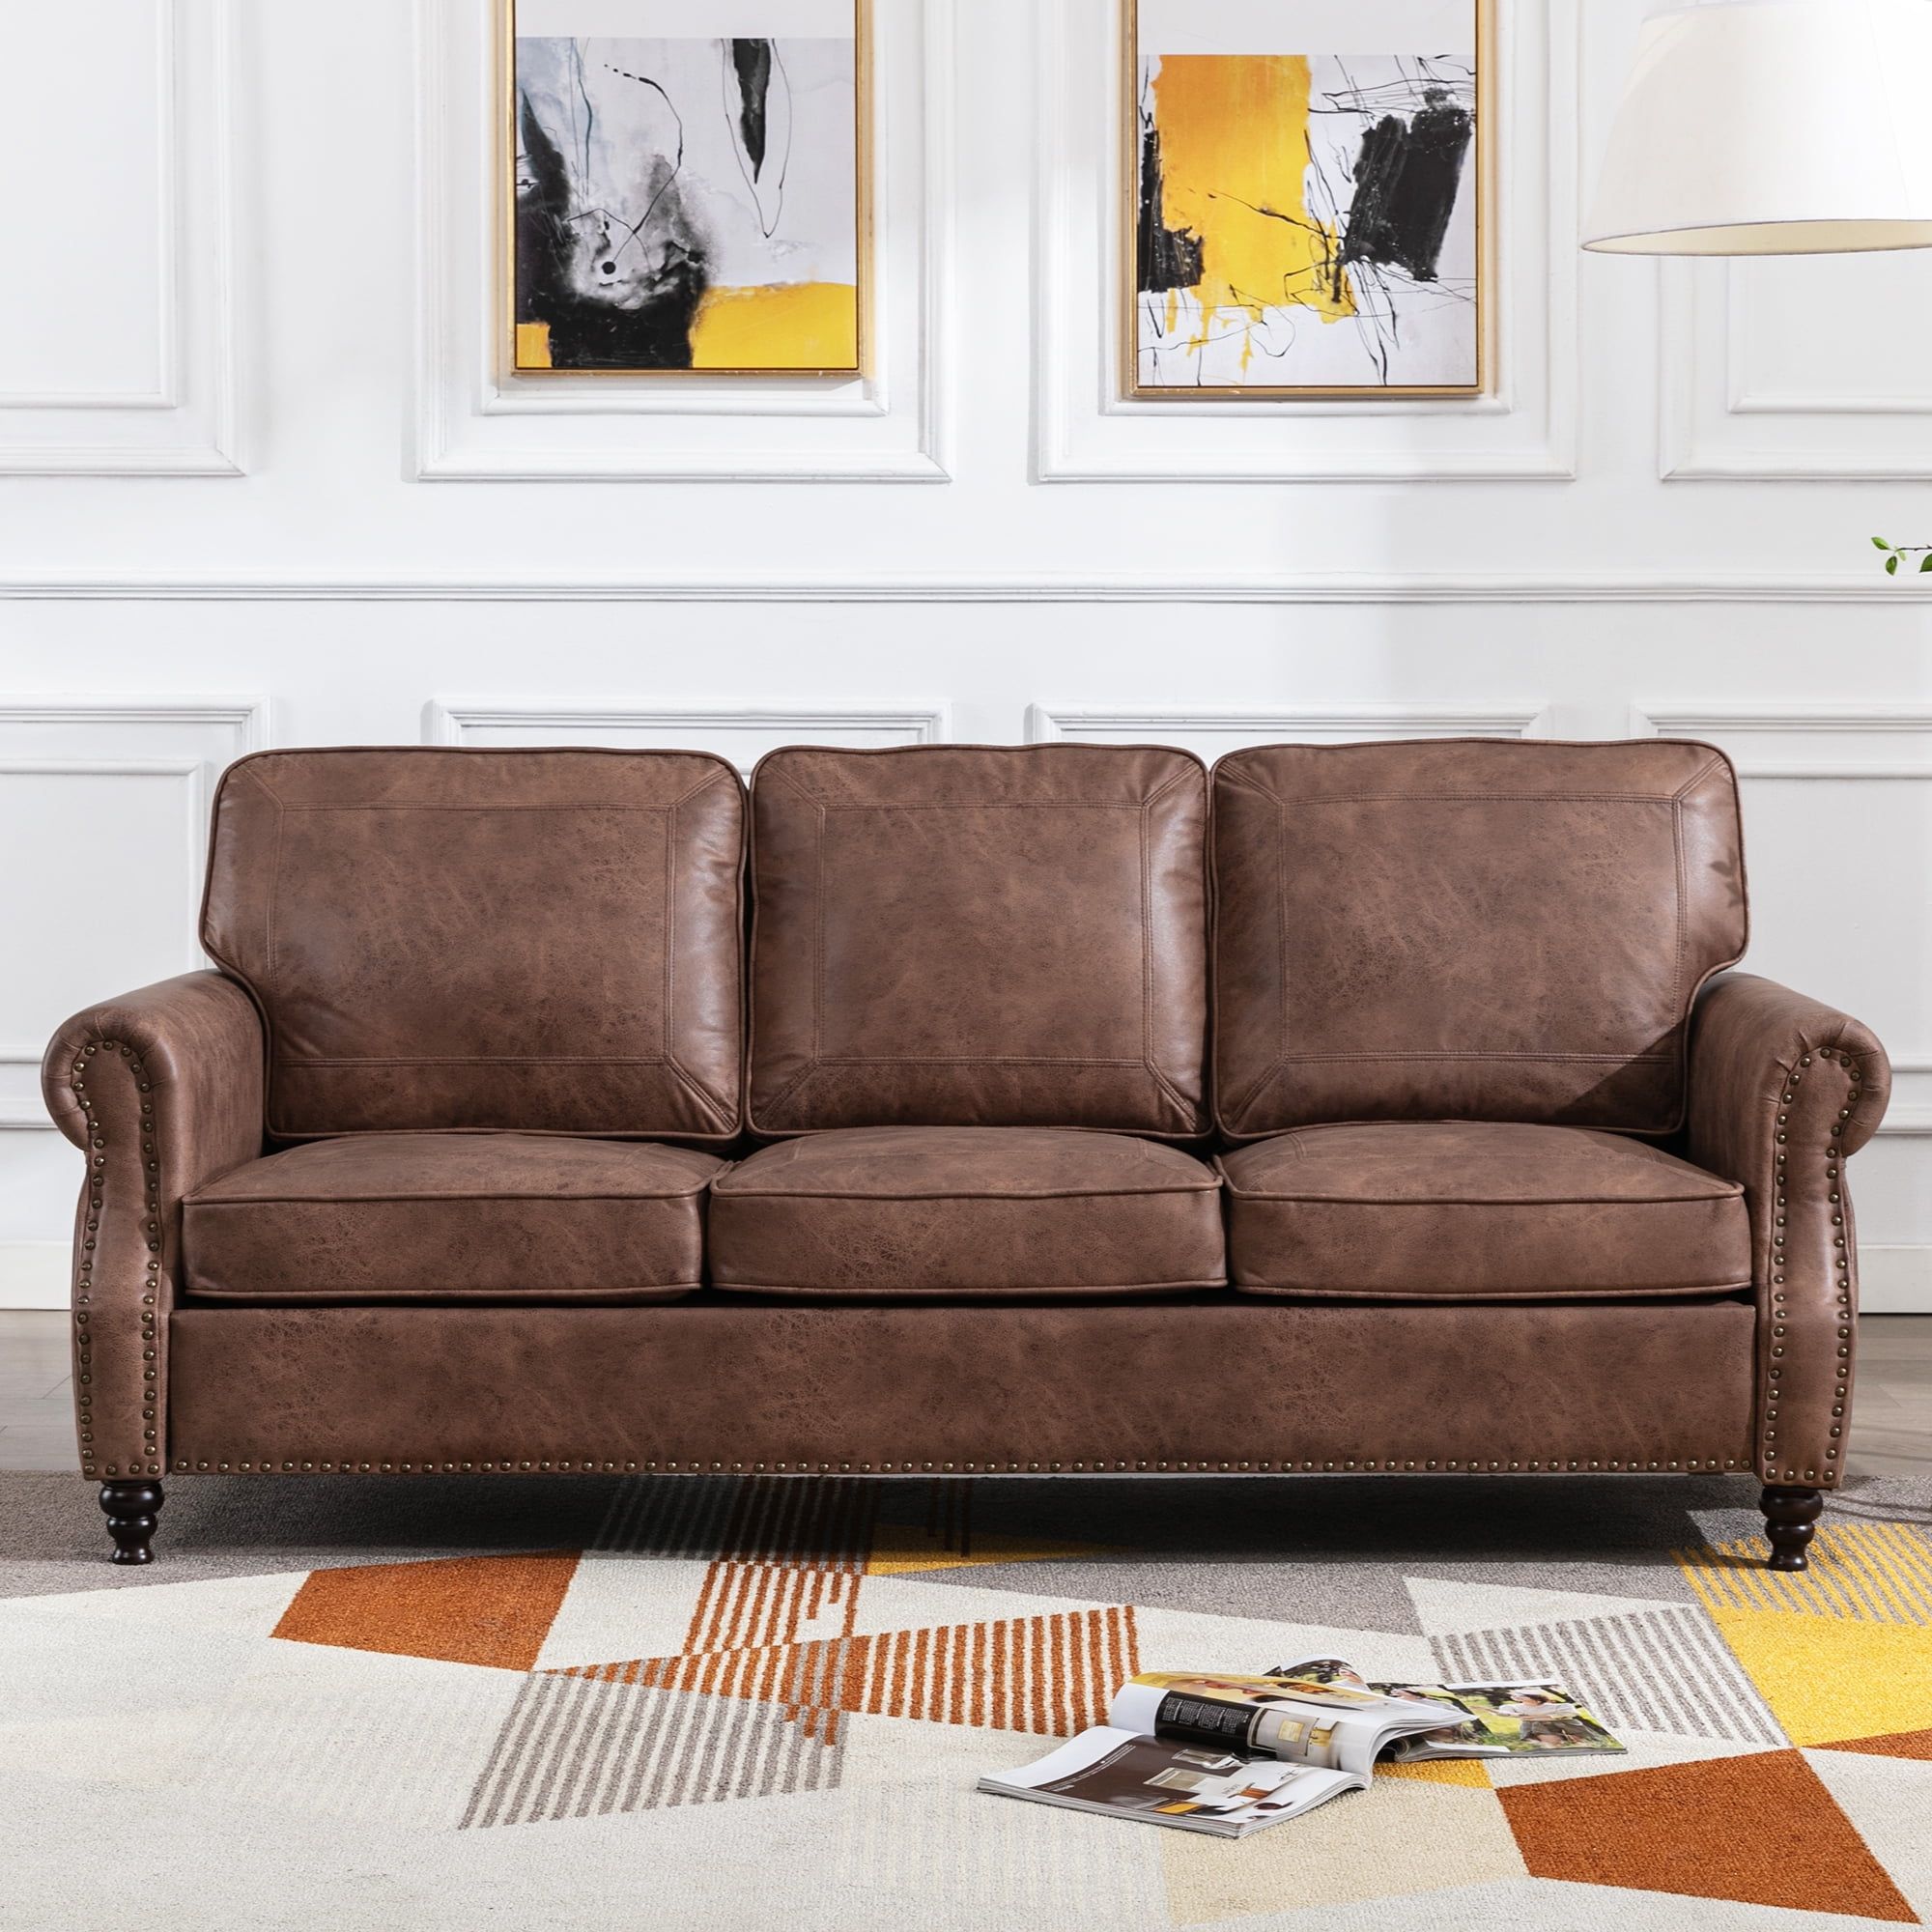 Dreamsir 80" Faux Leather Sofa Couch – Traditional 3 Seater With Nailhead  Trim, Rolled Arms, And Easy Assembly (dark Brown) – Walmart Intended For Traditional 3 Seater Sofas (Photo 1 of 15)